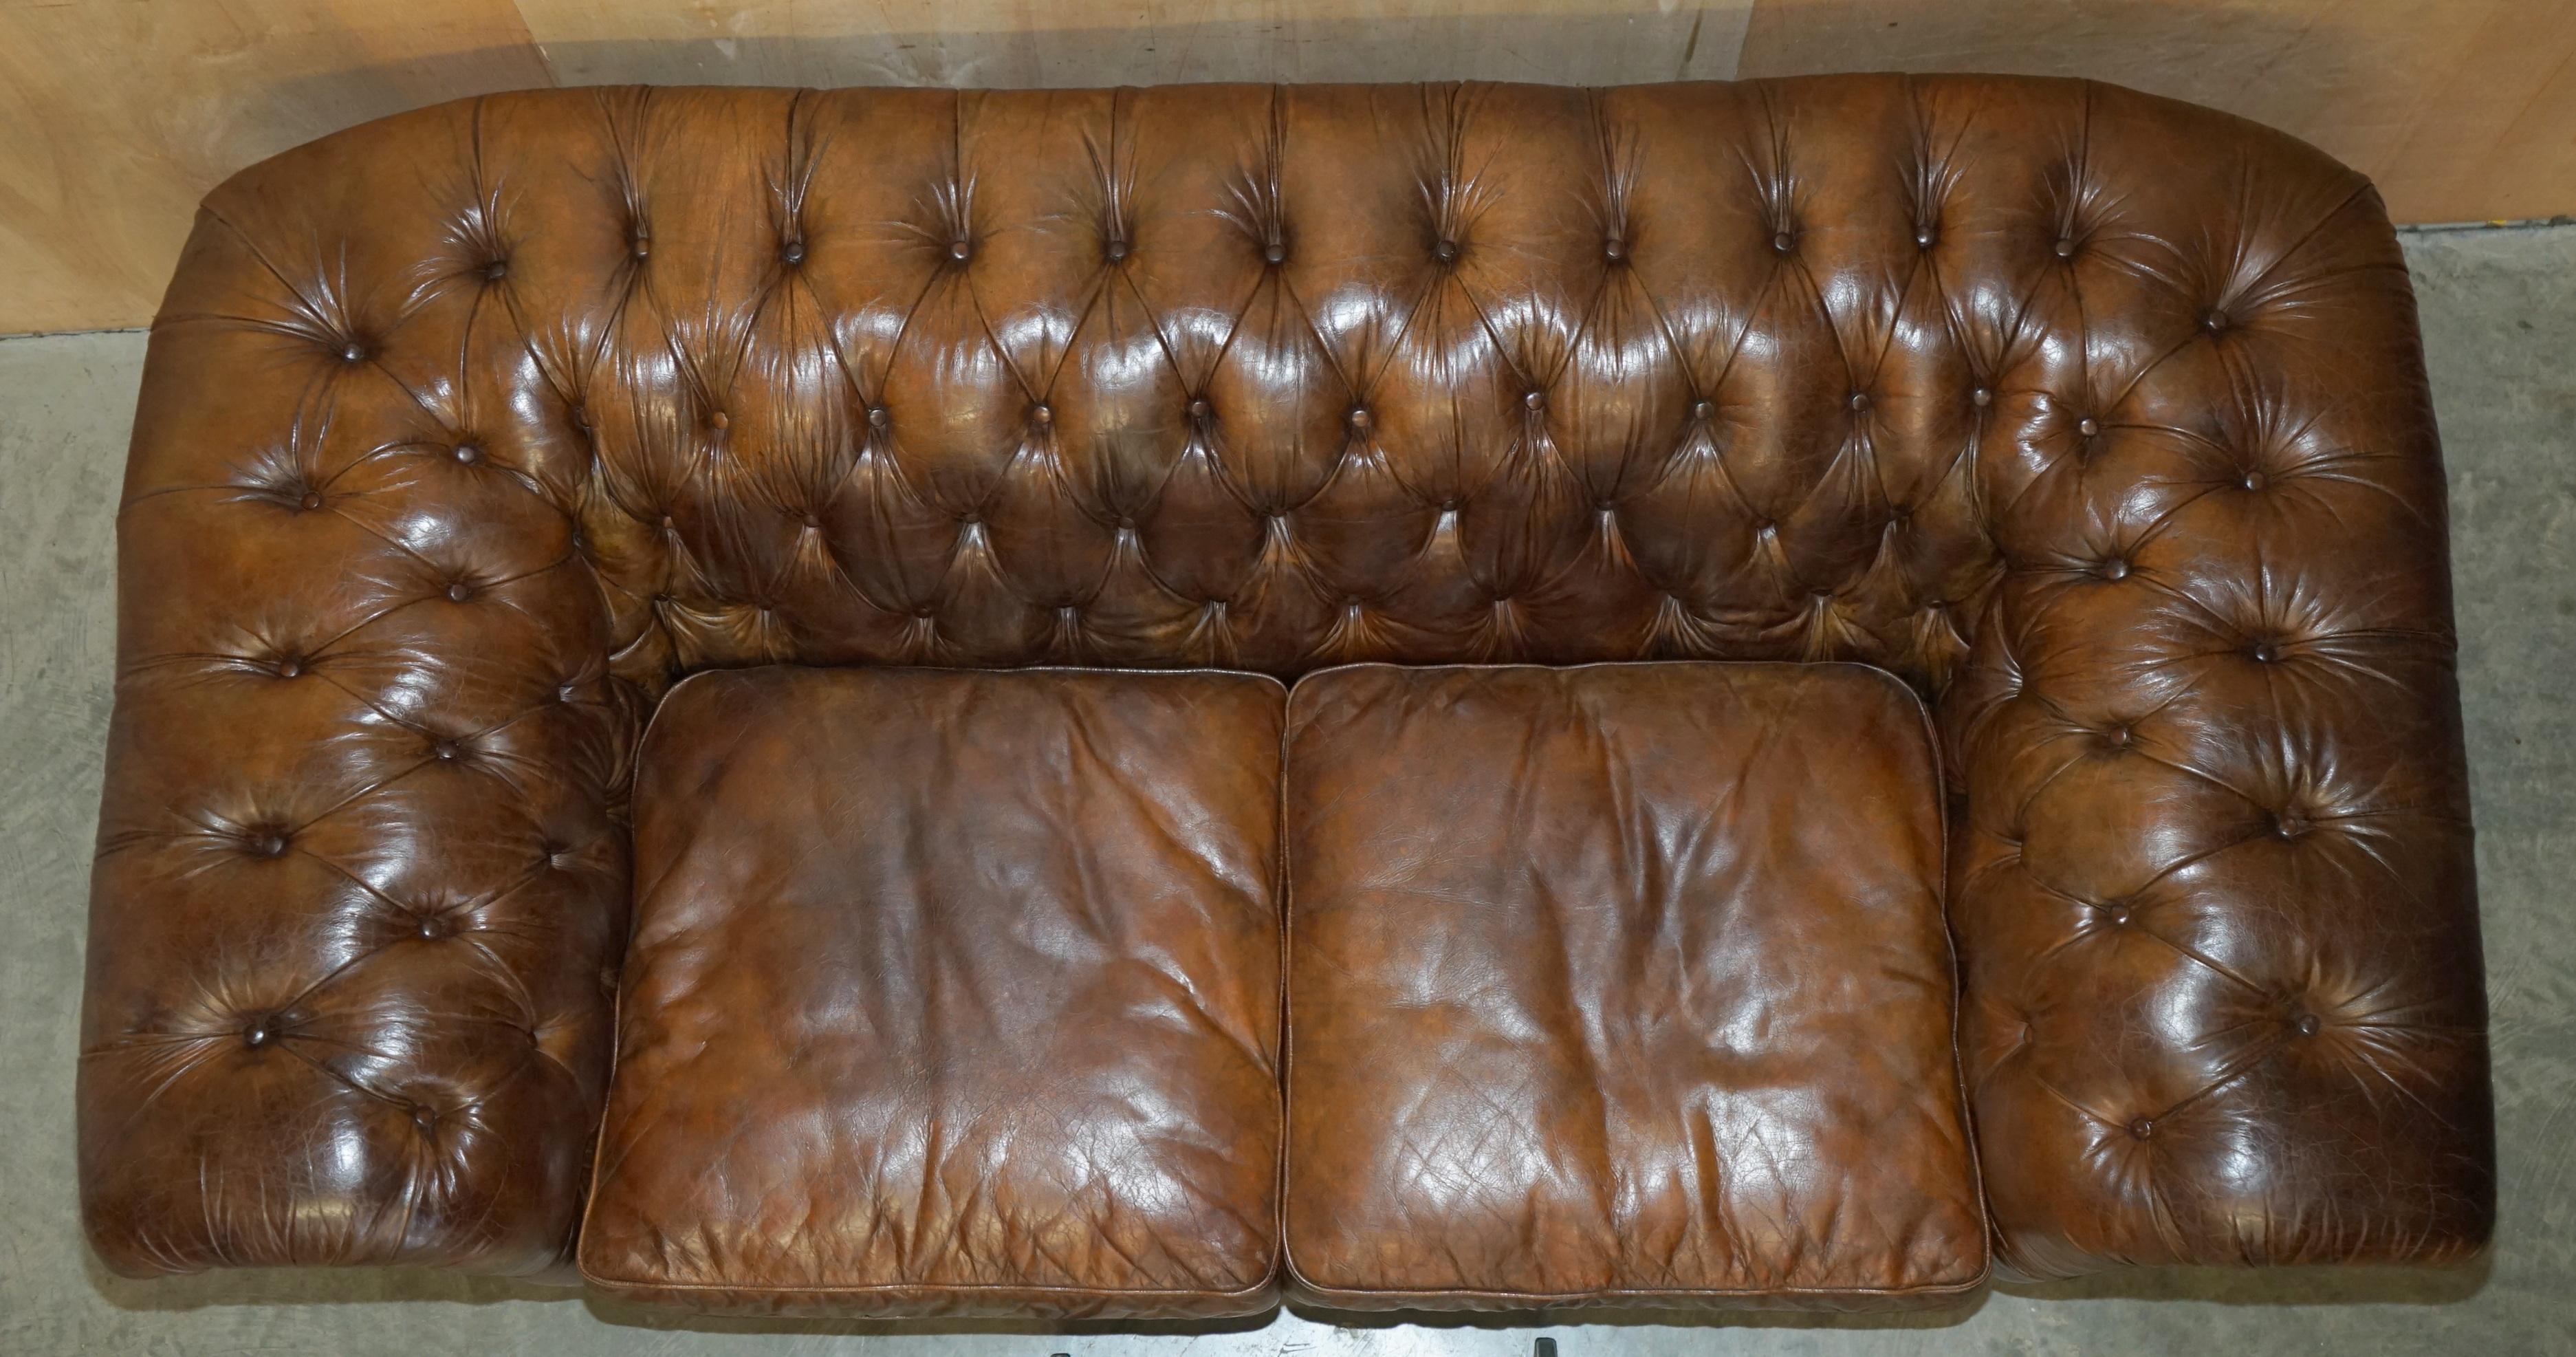 Cuir 1 DE 2 SOFAS TIMOTHY OULTON HERITAGE BROWN OVERSIZED LEATHER CHESTERFIELD HALO en vente